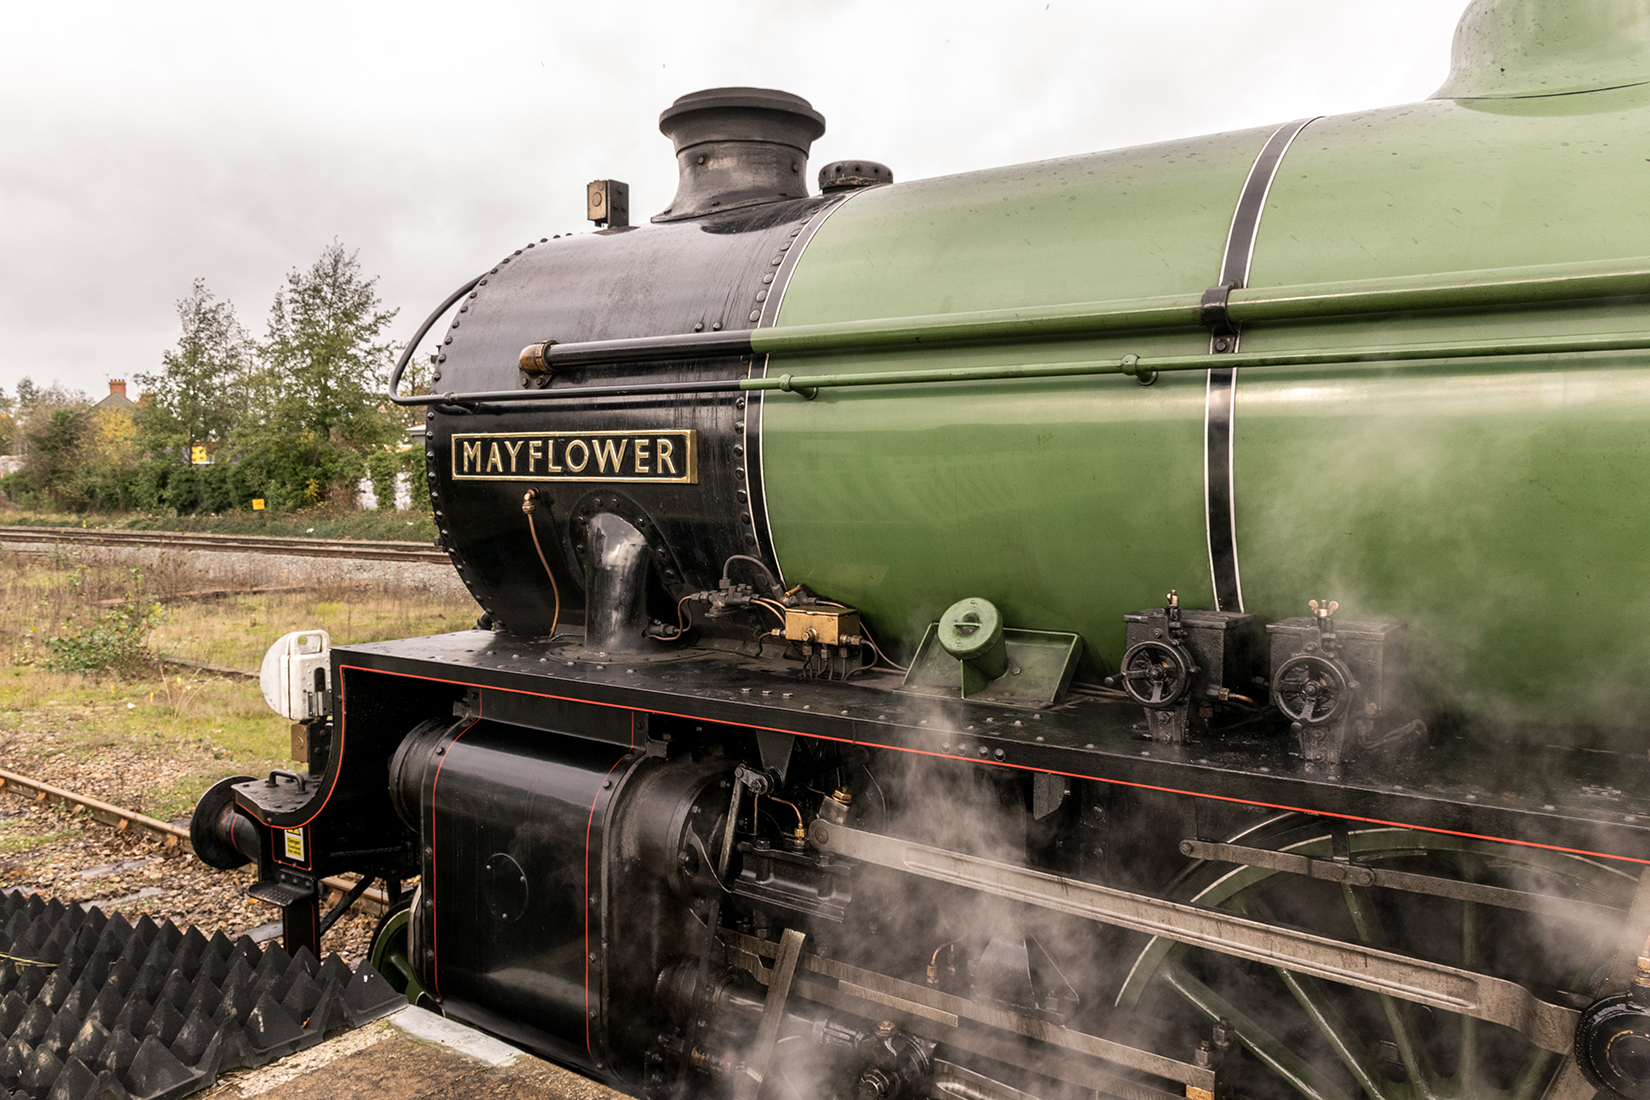 Built for the LNER, 61306 Mayflower is one of two surviving B1 Class locos